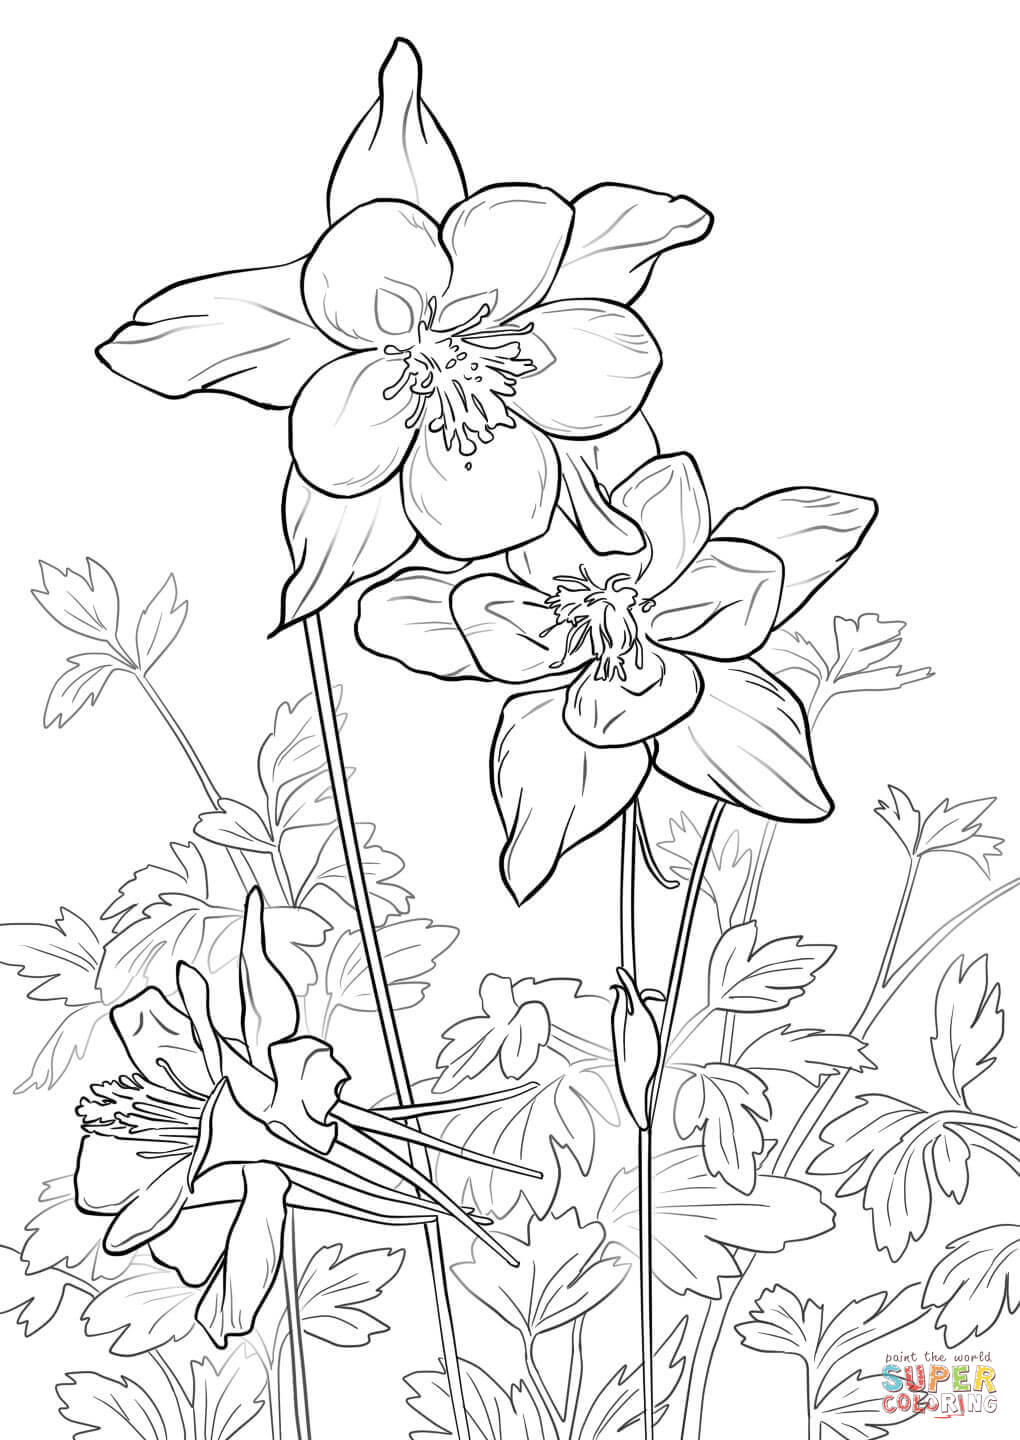 Rocky Mountain Columbine Coloring Page